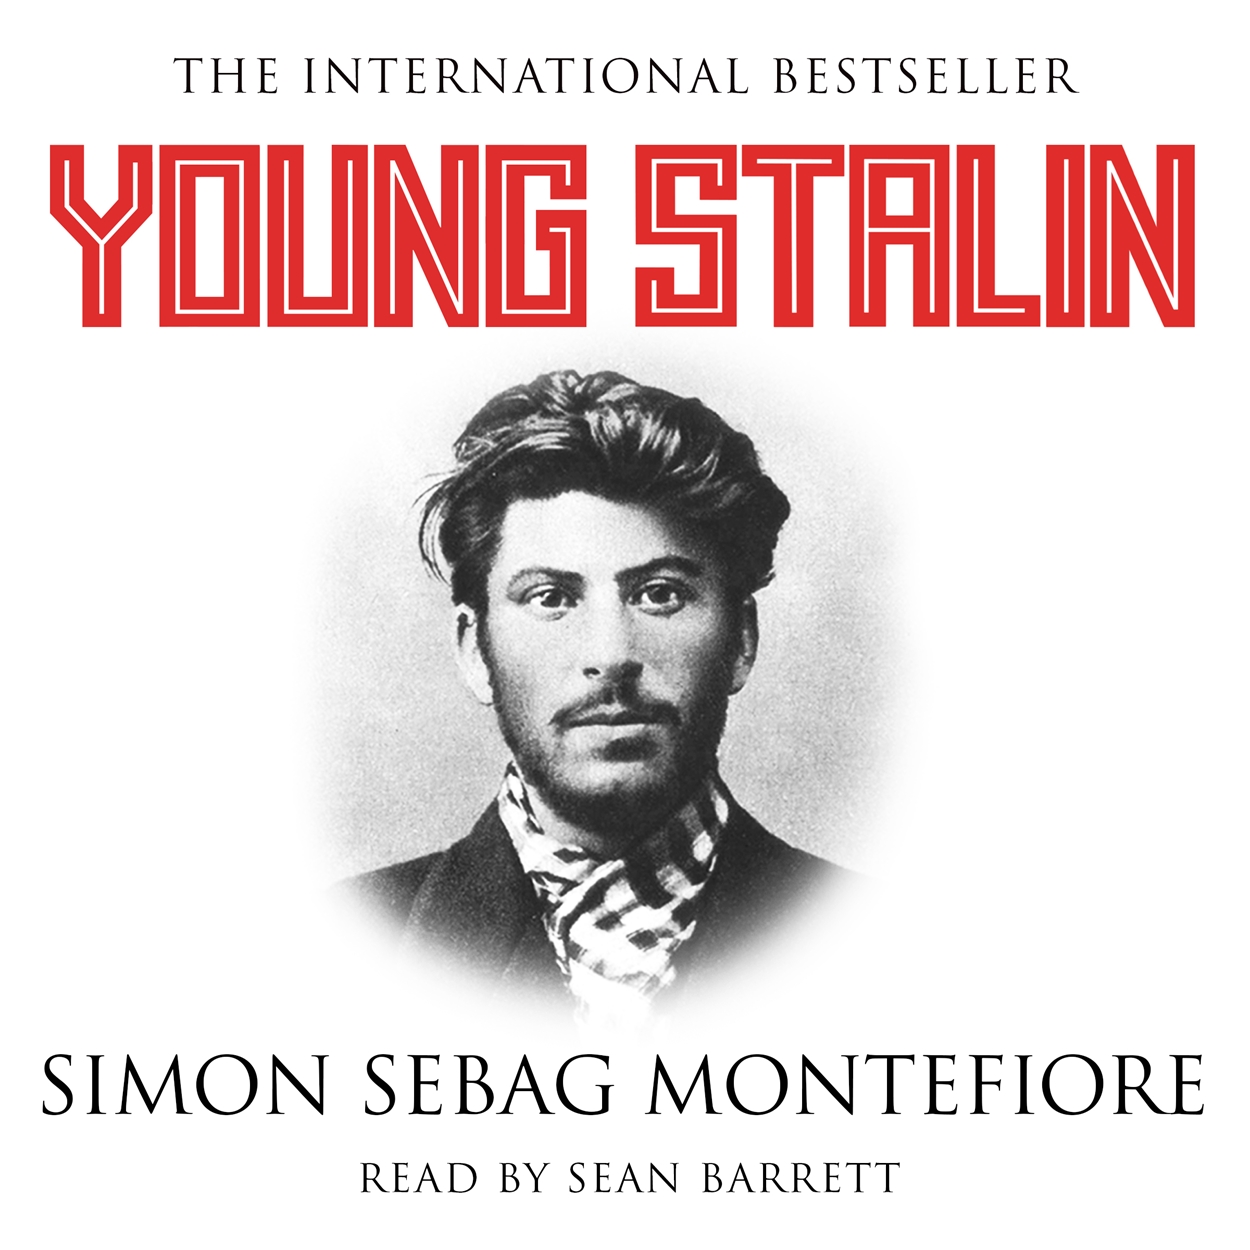 montefiore young stalin